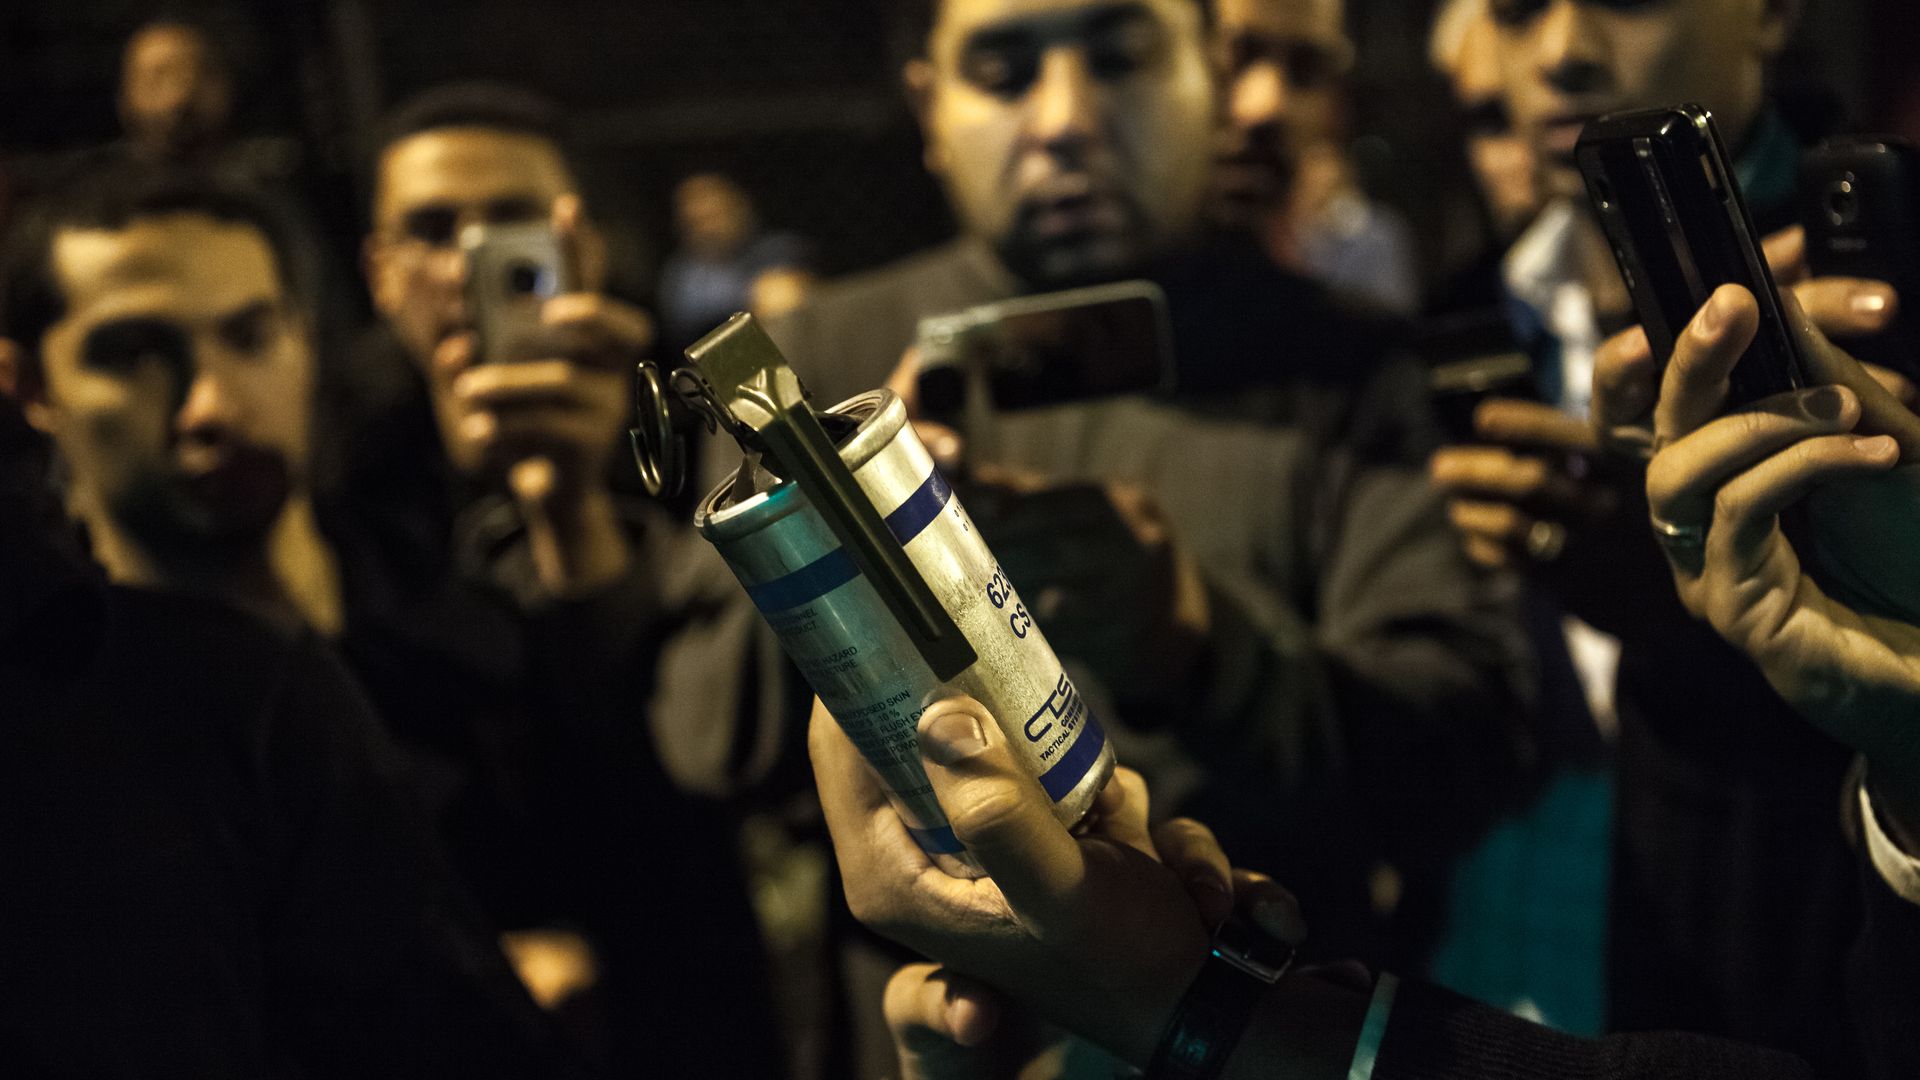 Protesters in Cairo use cell phones to photograph a tear gas container in 2011. Photo: Karimphoto via Getty Images